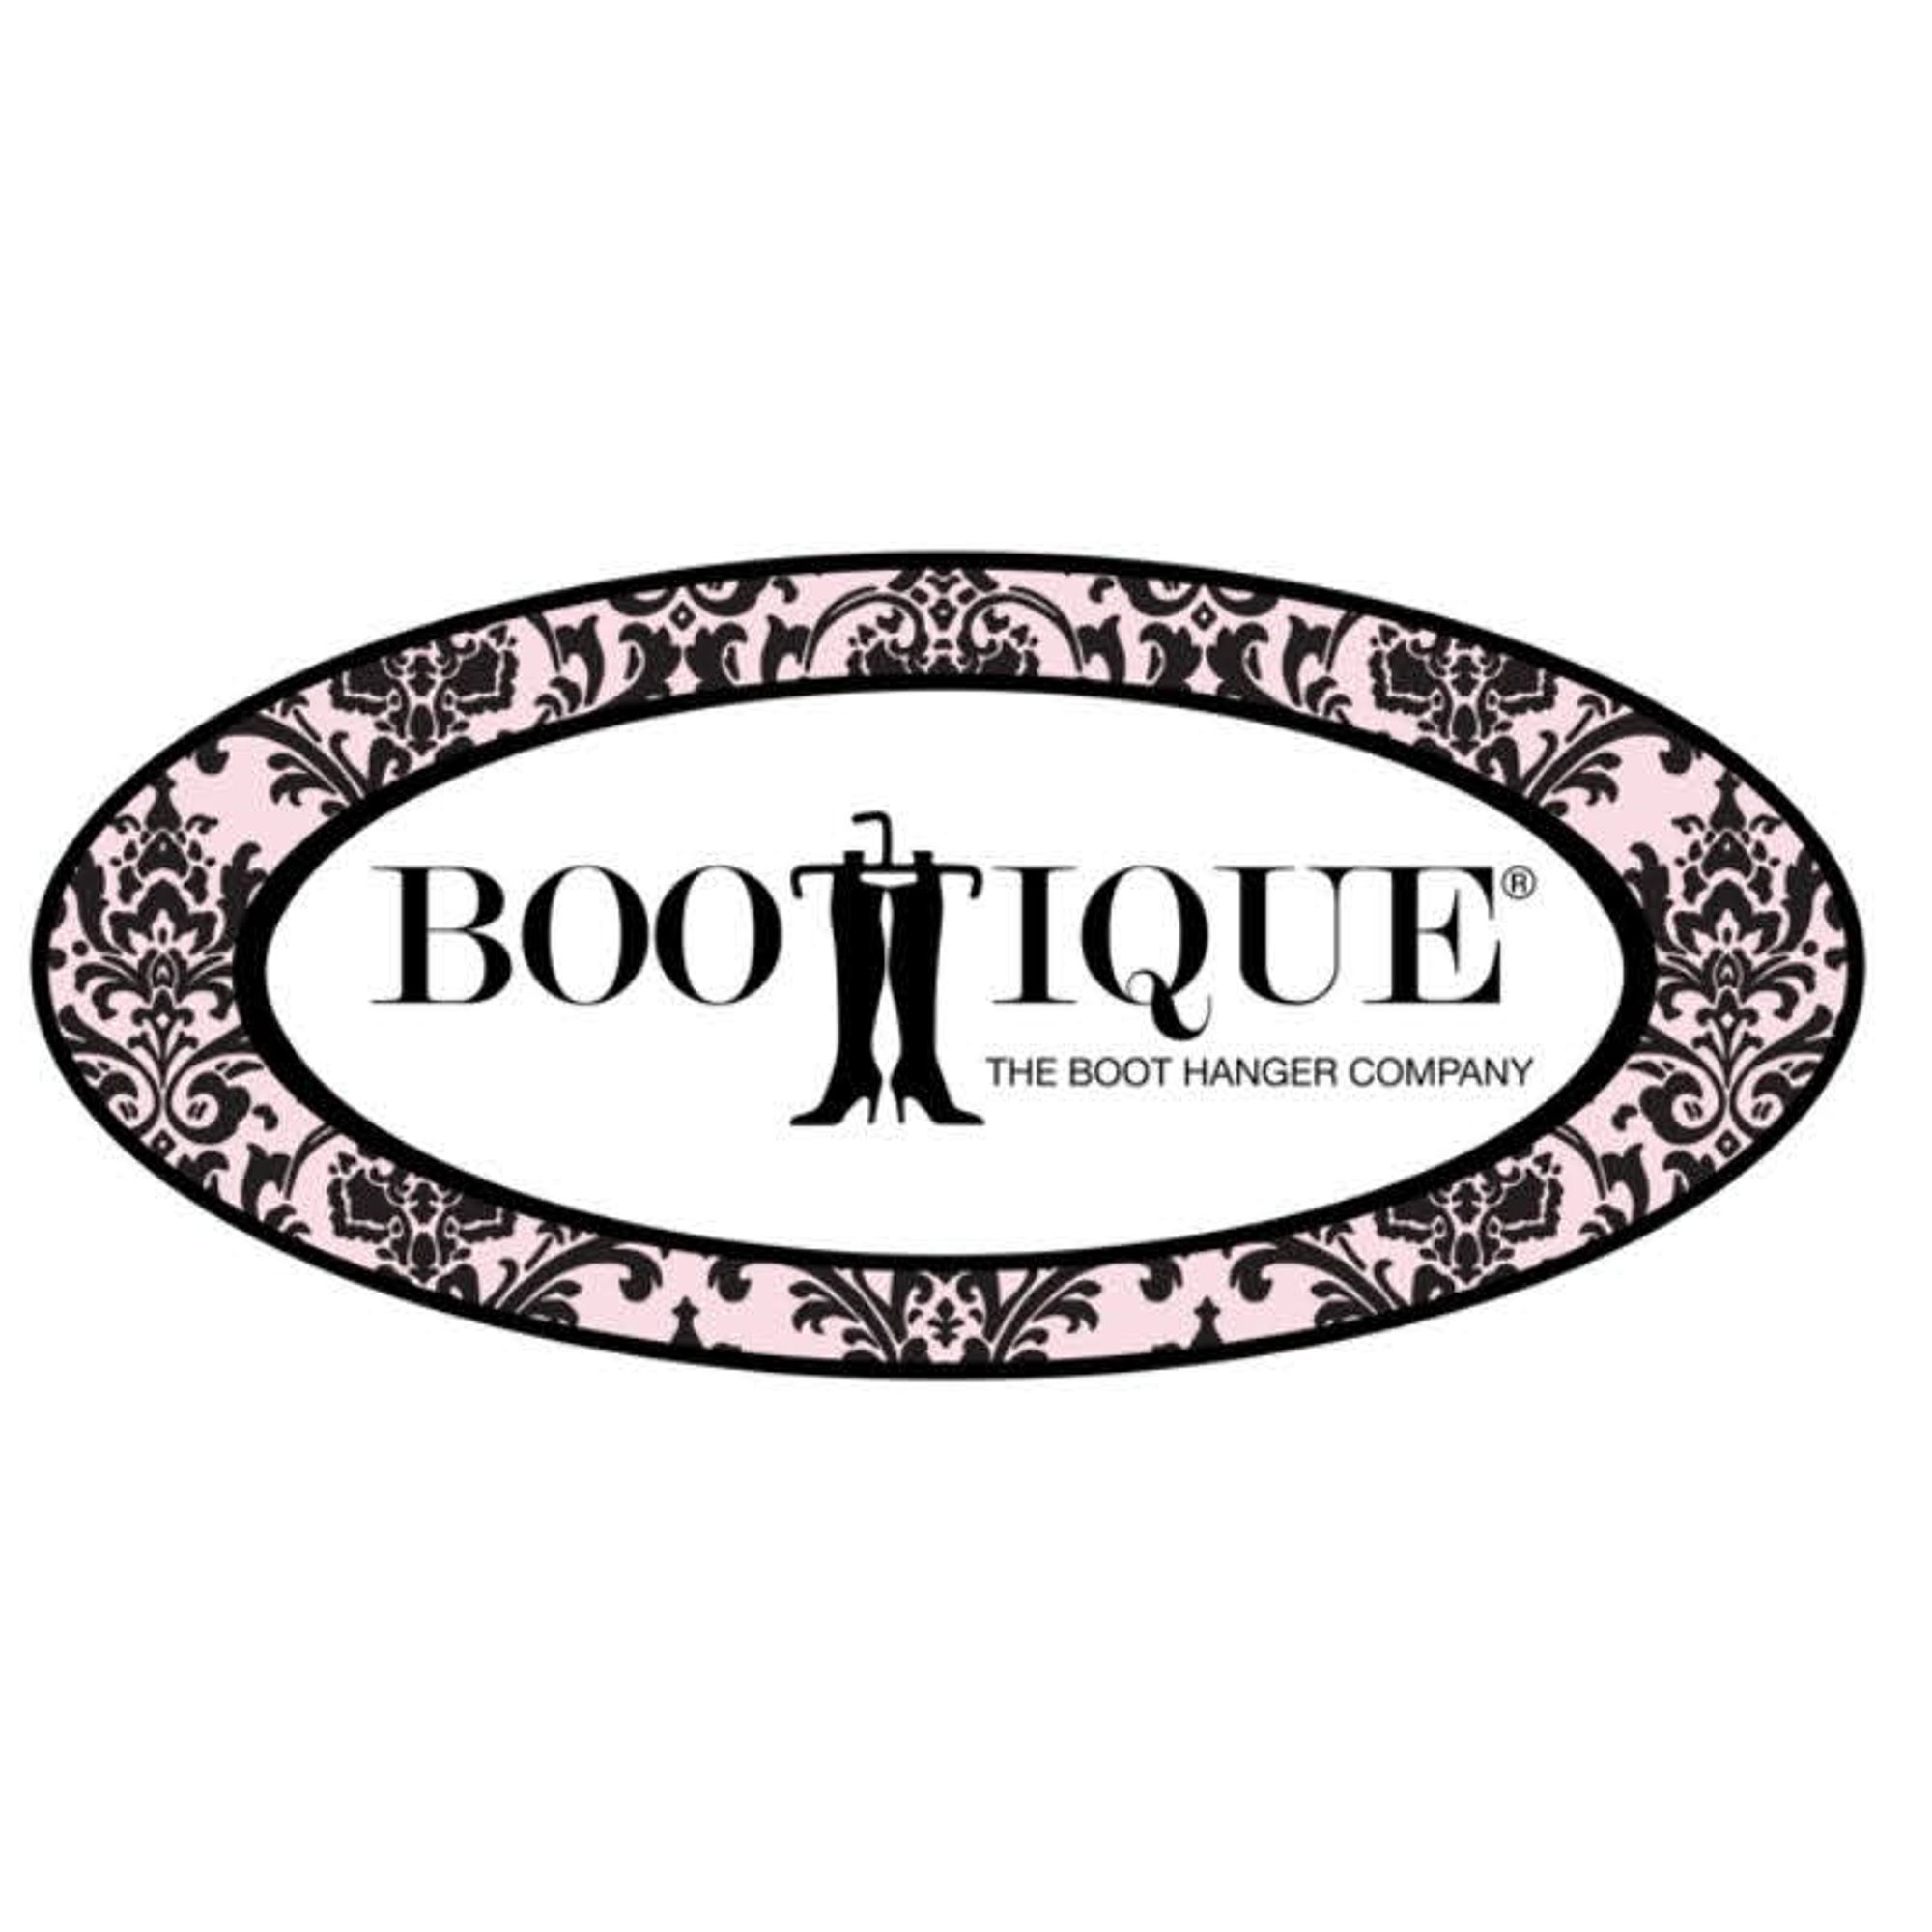 Boottique- The Boot Hanger Company